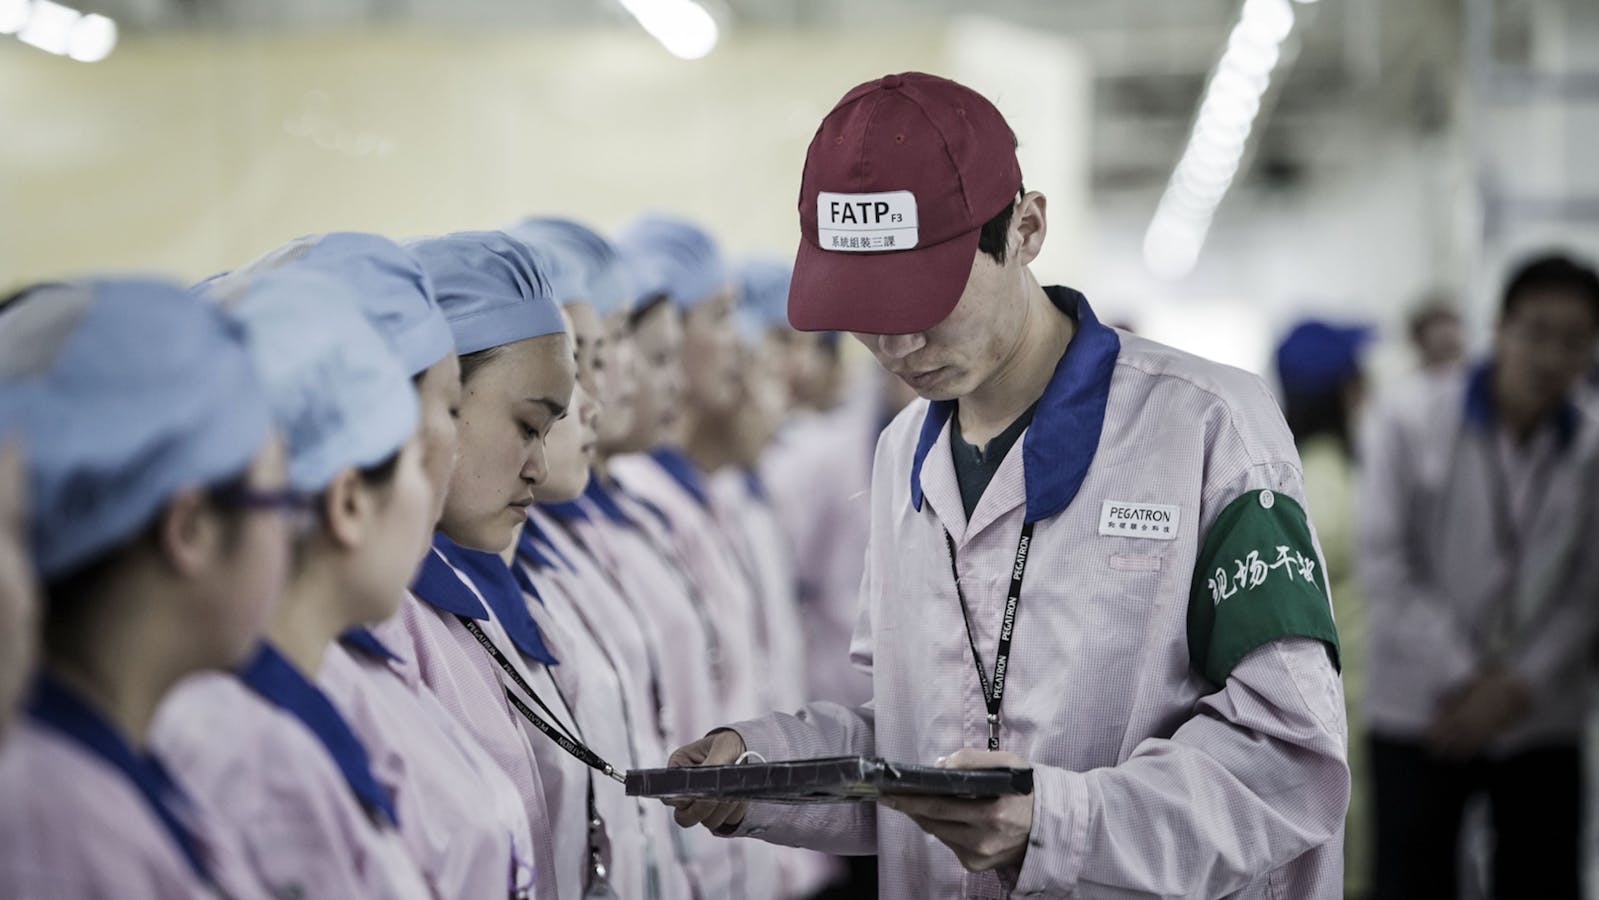 A supervisor holds checks an employee's badge during roll call at a Pegatron factory in Shanghai. Photo by Bloomberg